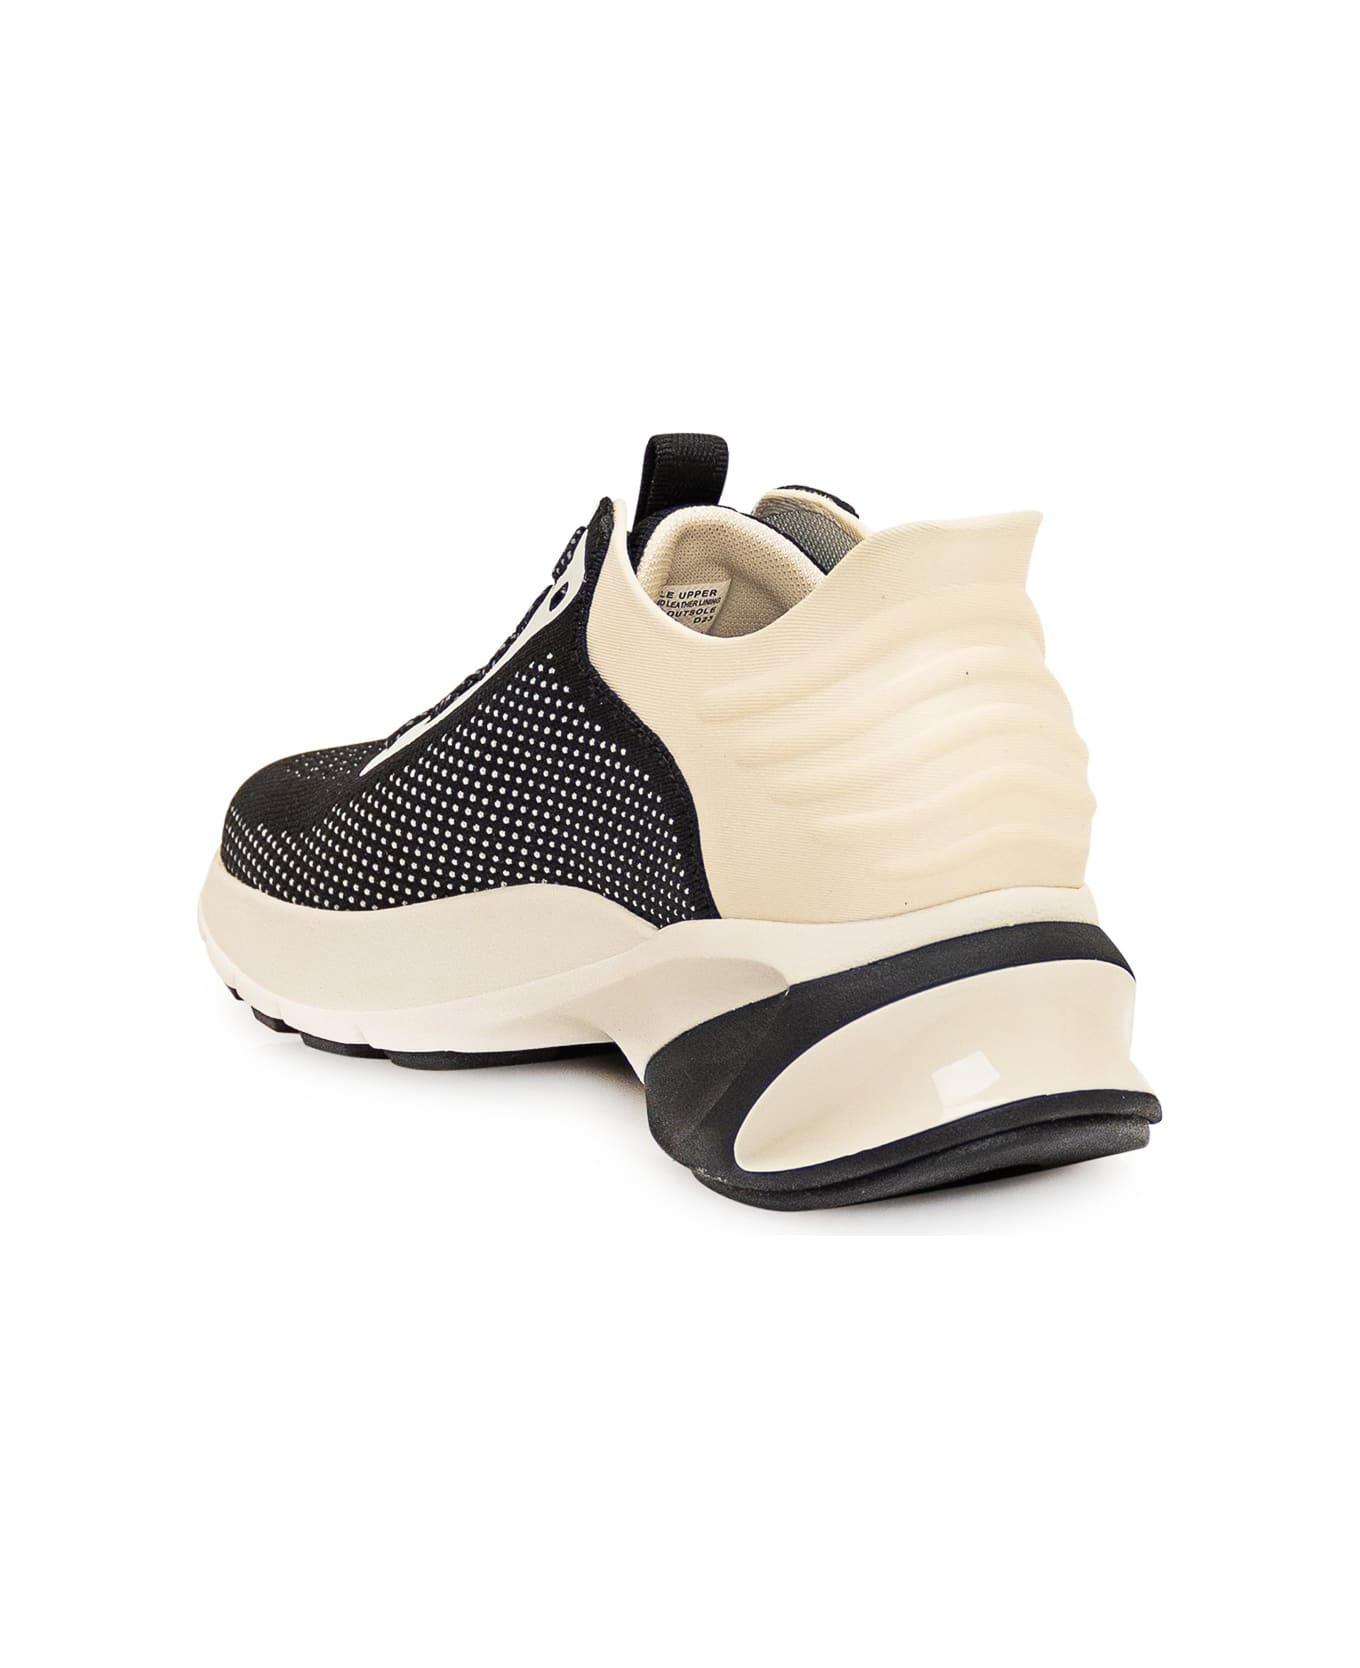 Tory Burch Good Luck Trainer Sneaker - BLACK/NEW IVORY